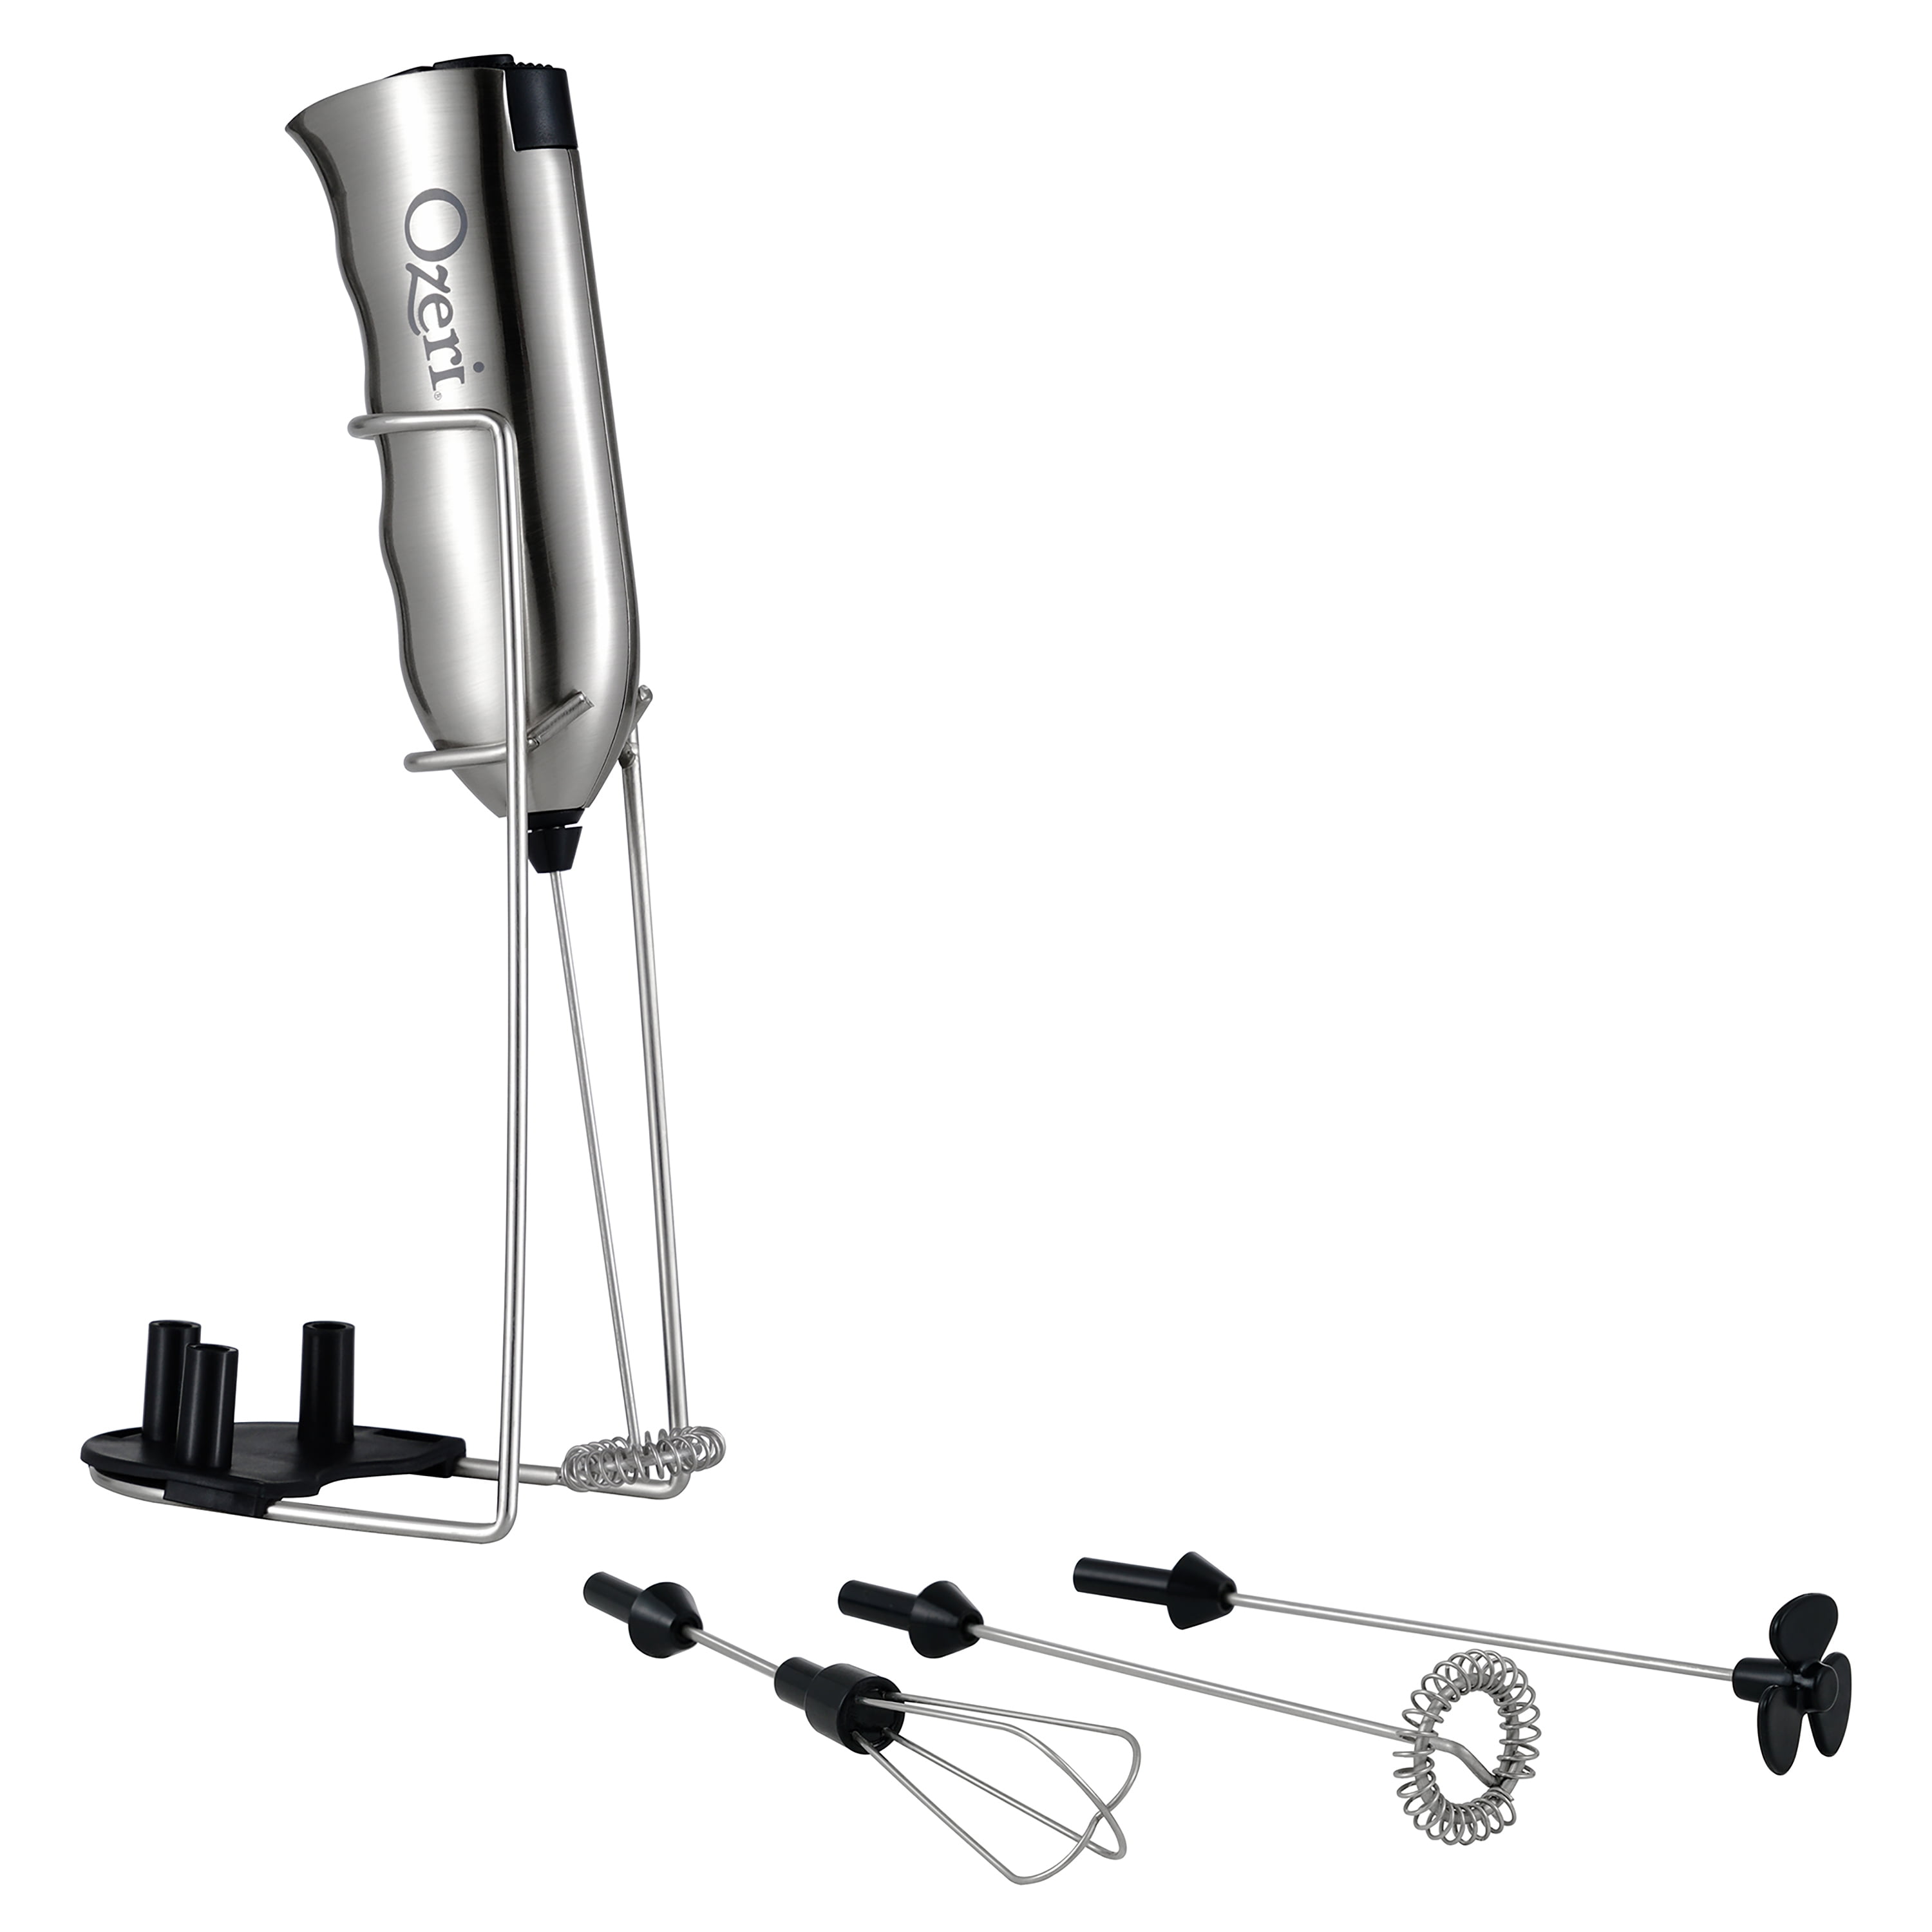 with Stand and 4 Frothing Attachments Ozeri Deluxe Milk Frother & Whisk in Stainless Steel 